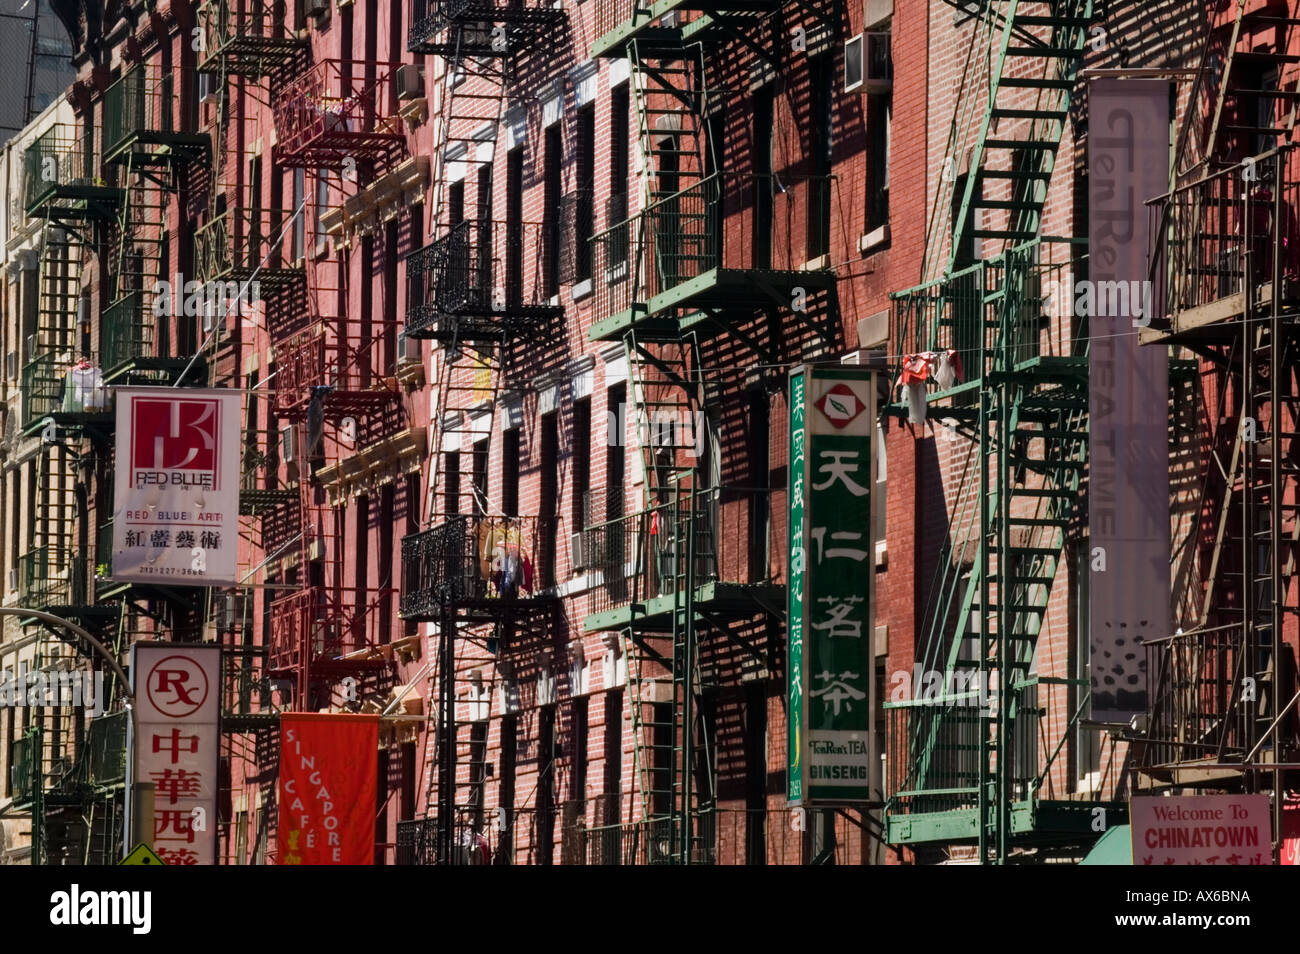 Fire escapes Mott Street Chinatown lower east side New York City Stock Photo